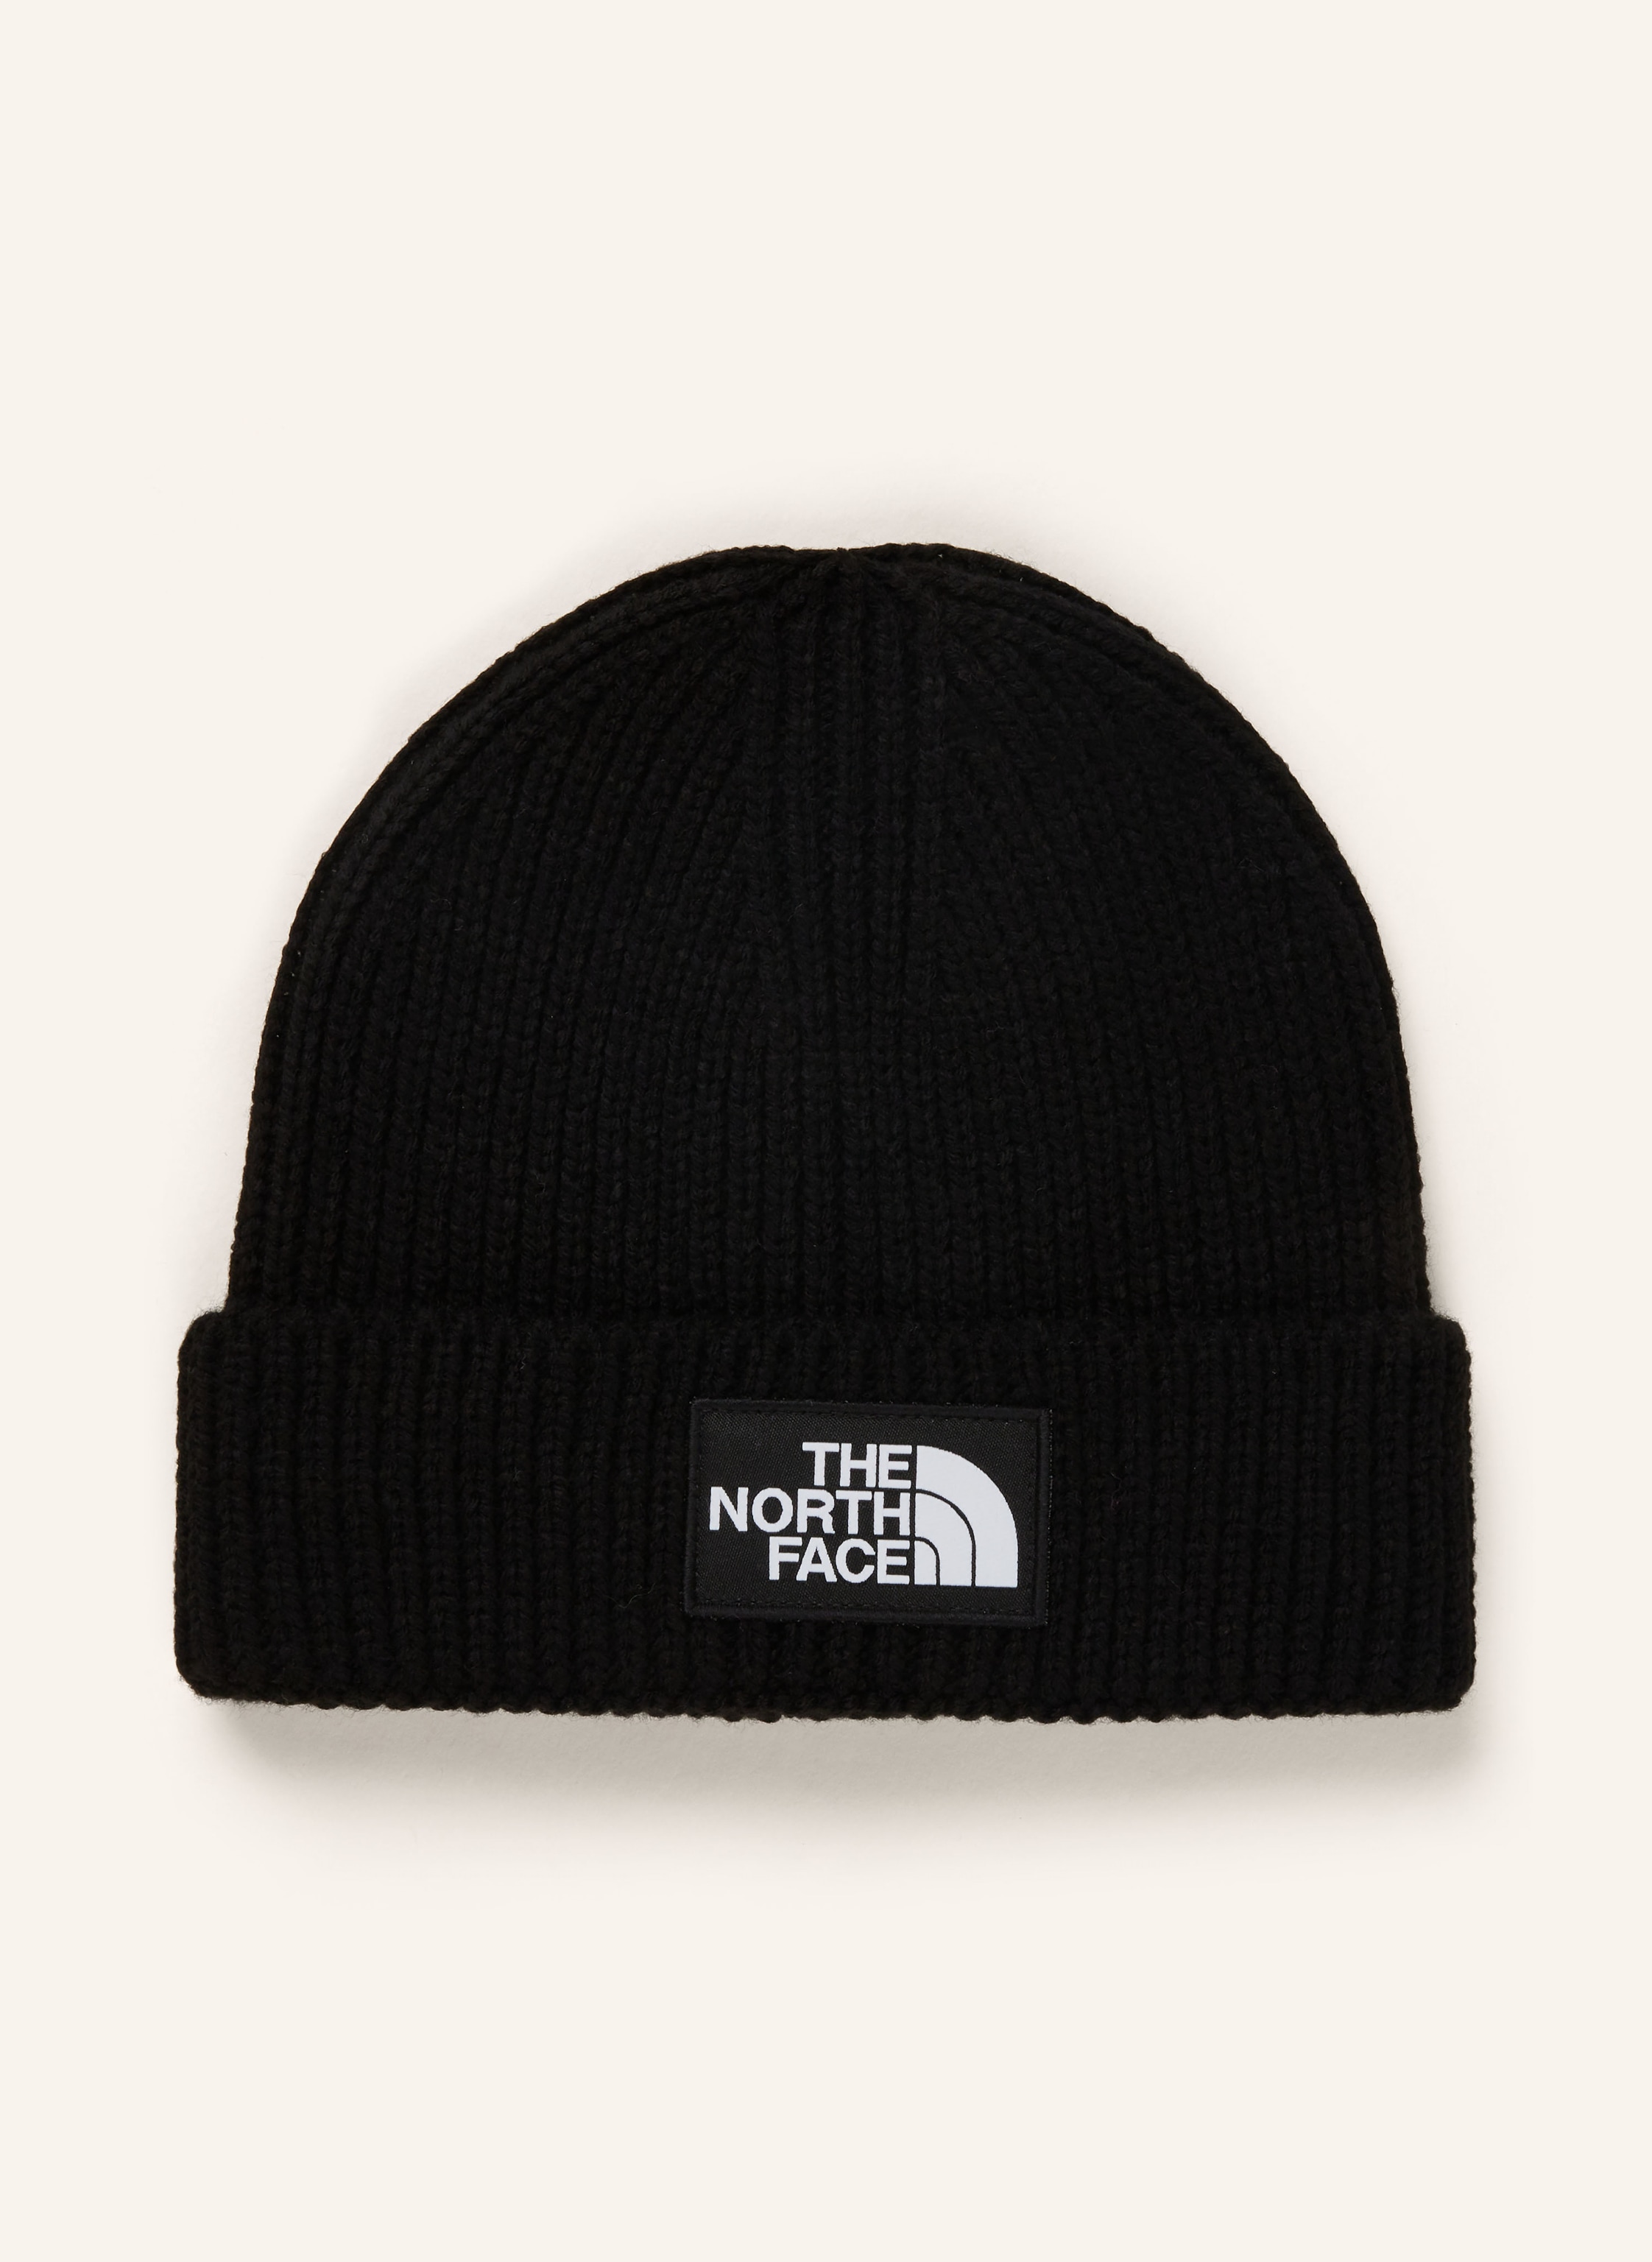 THE NORTH FACE Beanie in black